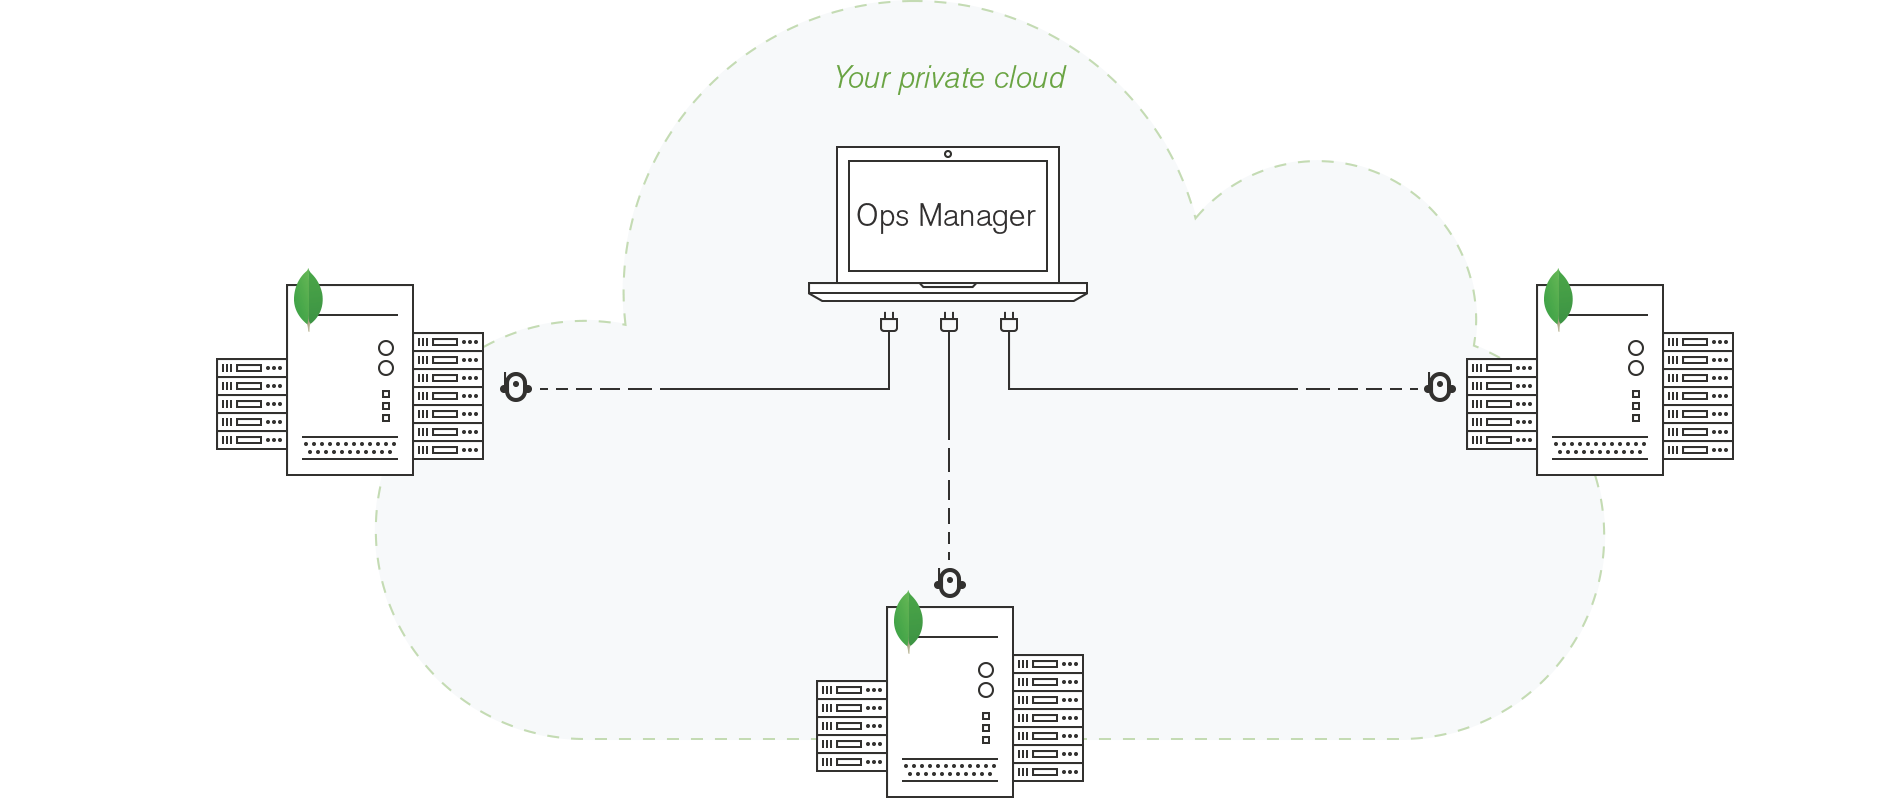 "Automation coordinates MongoDB instances running in a public cloud, in your private data center, or on your local system."